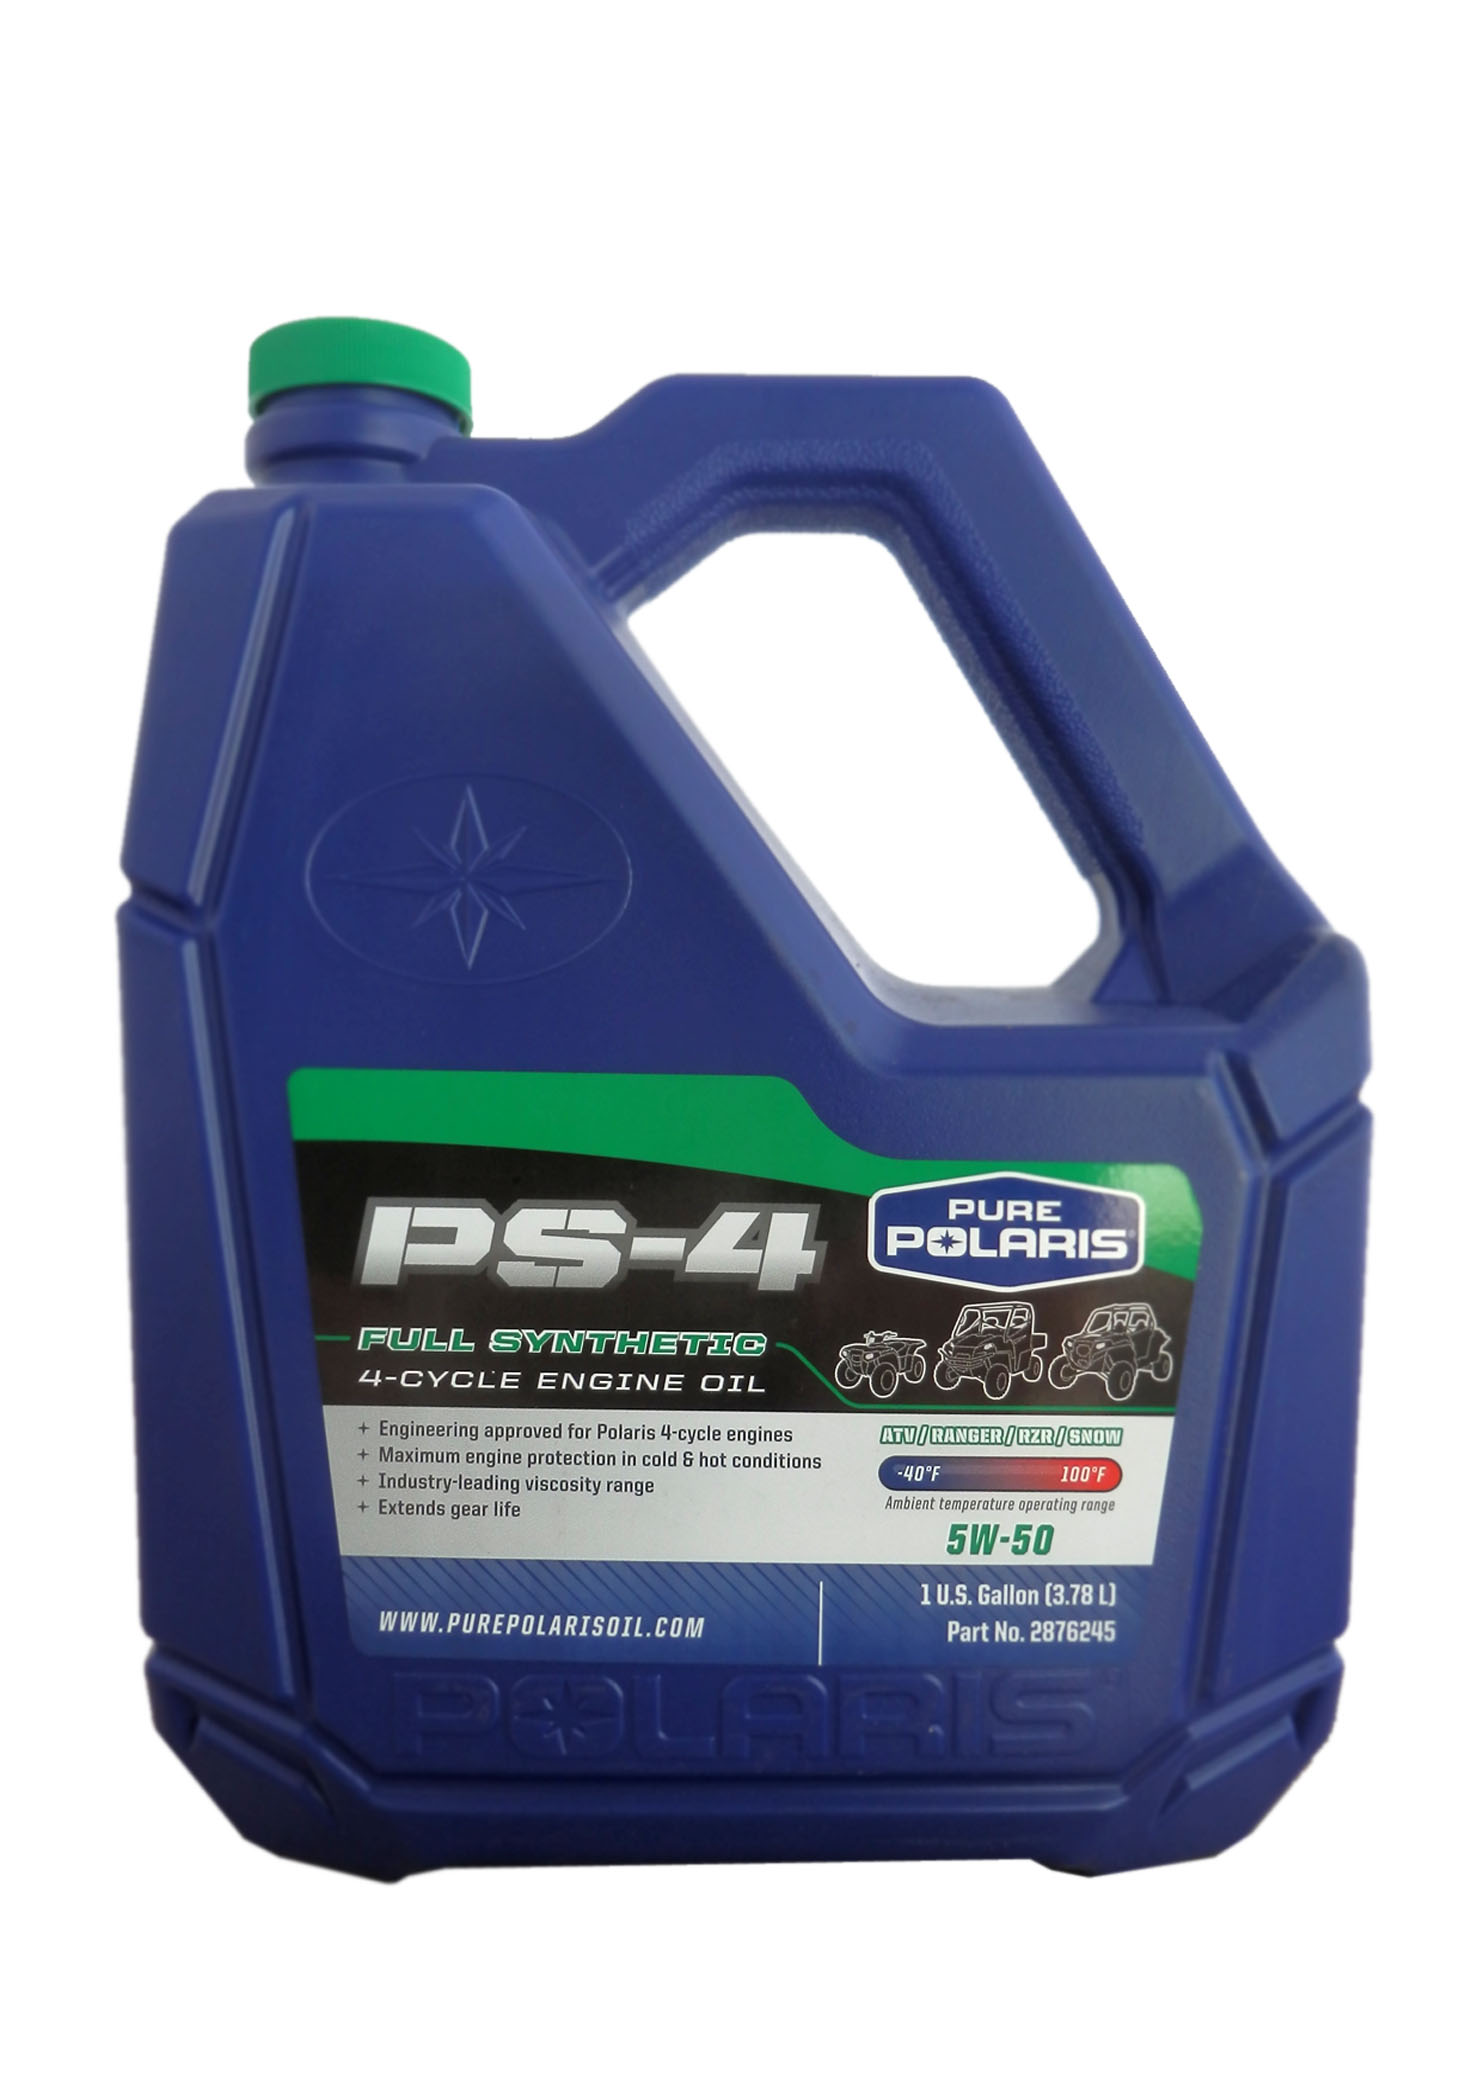 Моторное масло Polaris 2876245 PS-4 Full Synthetic 4 cycle Oil 5W-50 3.78 л